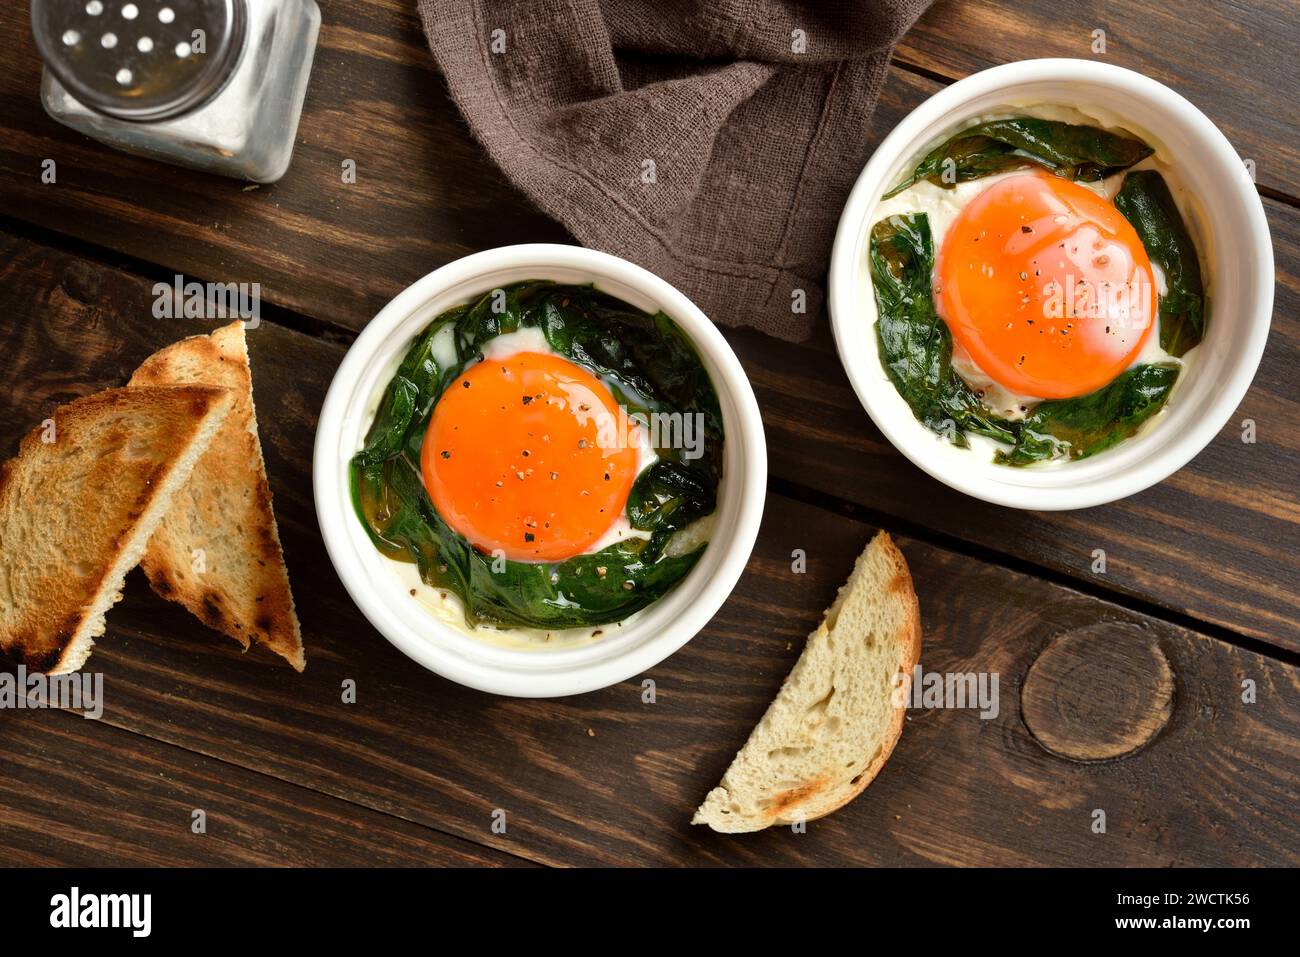 Baked eggs with vibrant orange yolks with cream, сheese and spinach in portion bowl served with grilled bread slices for dipping. Eggs en cocotte in r Stock Photo